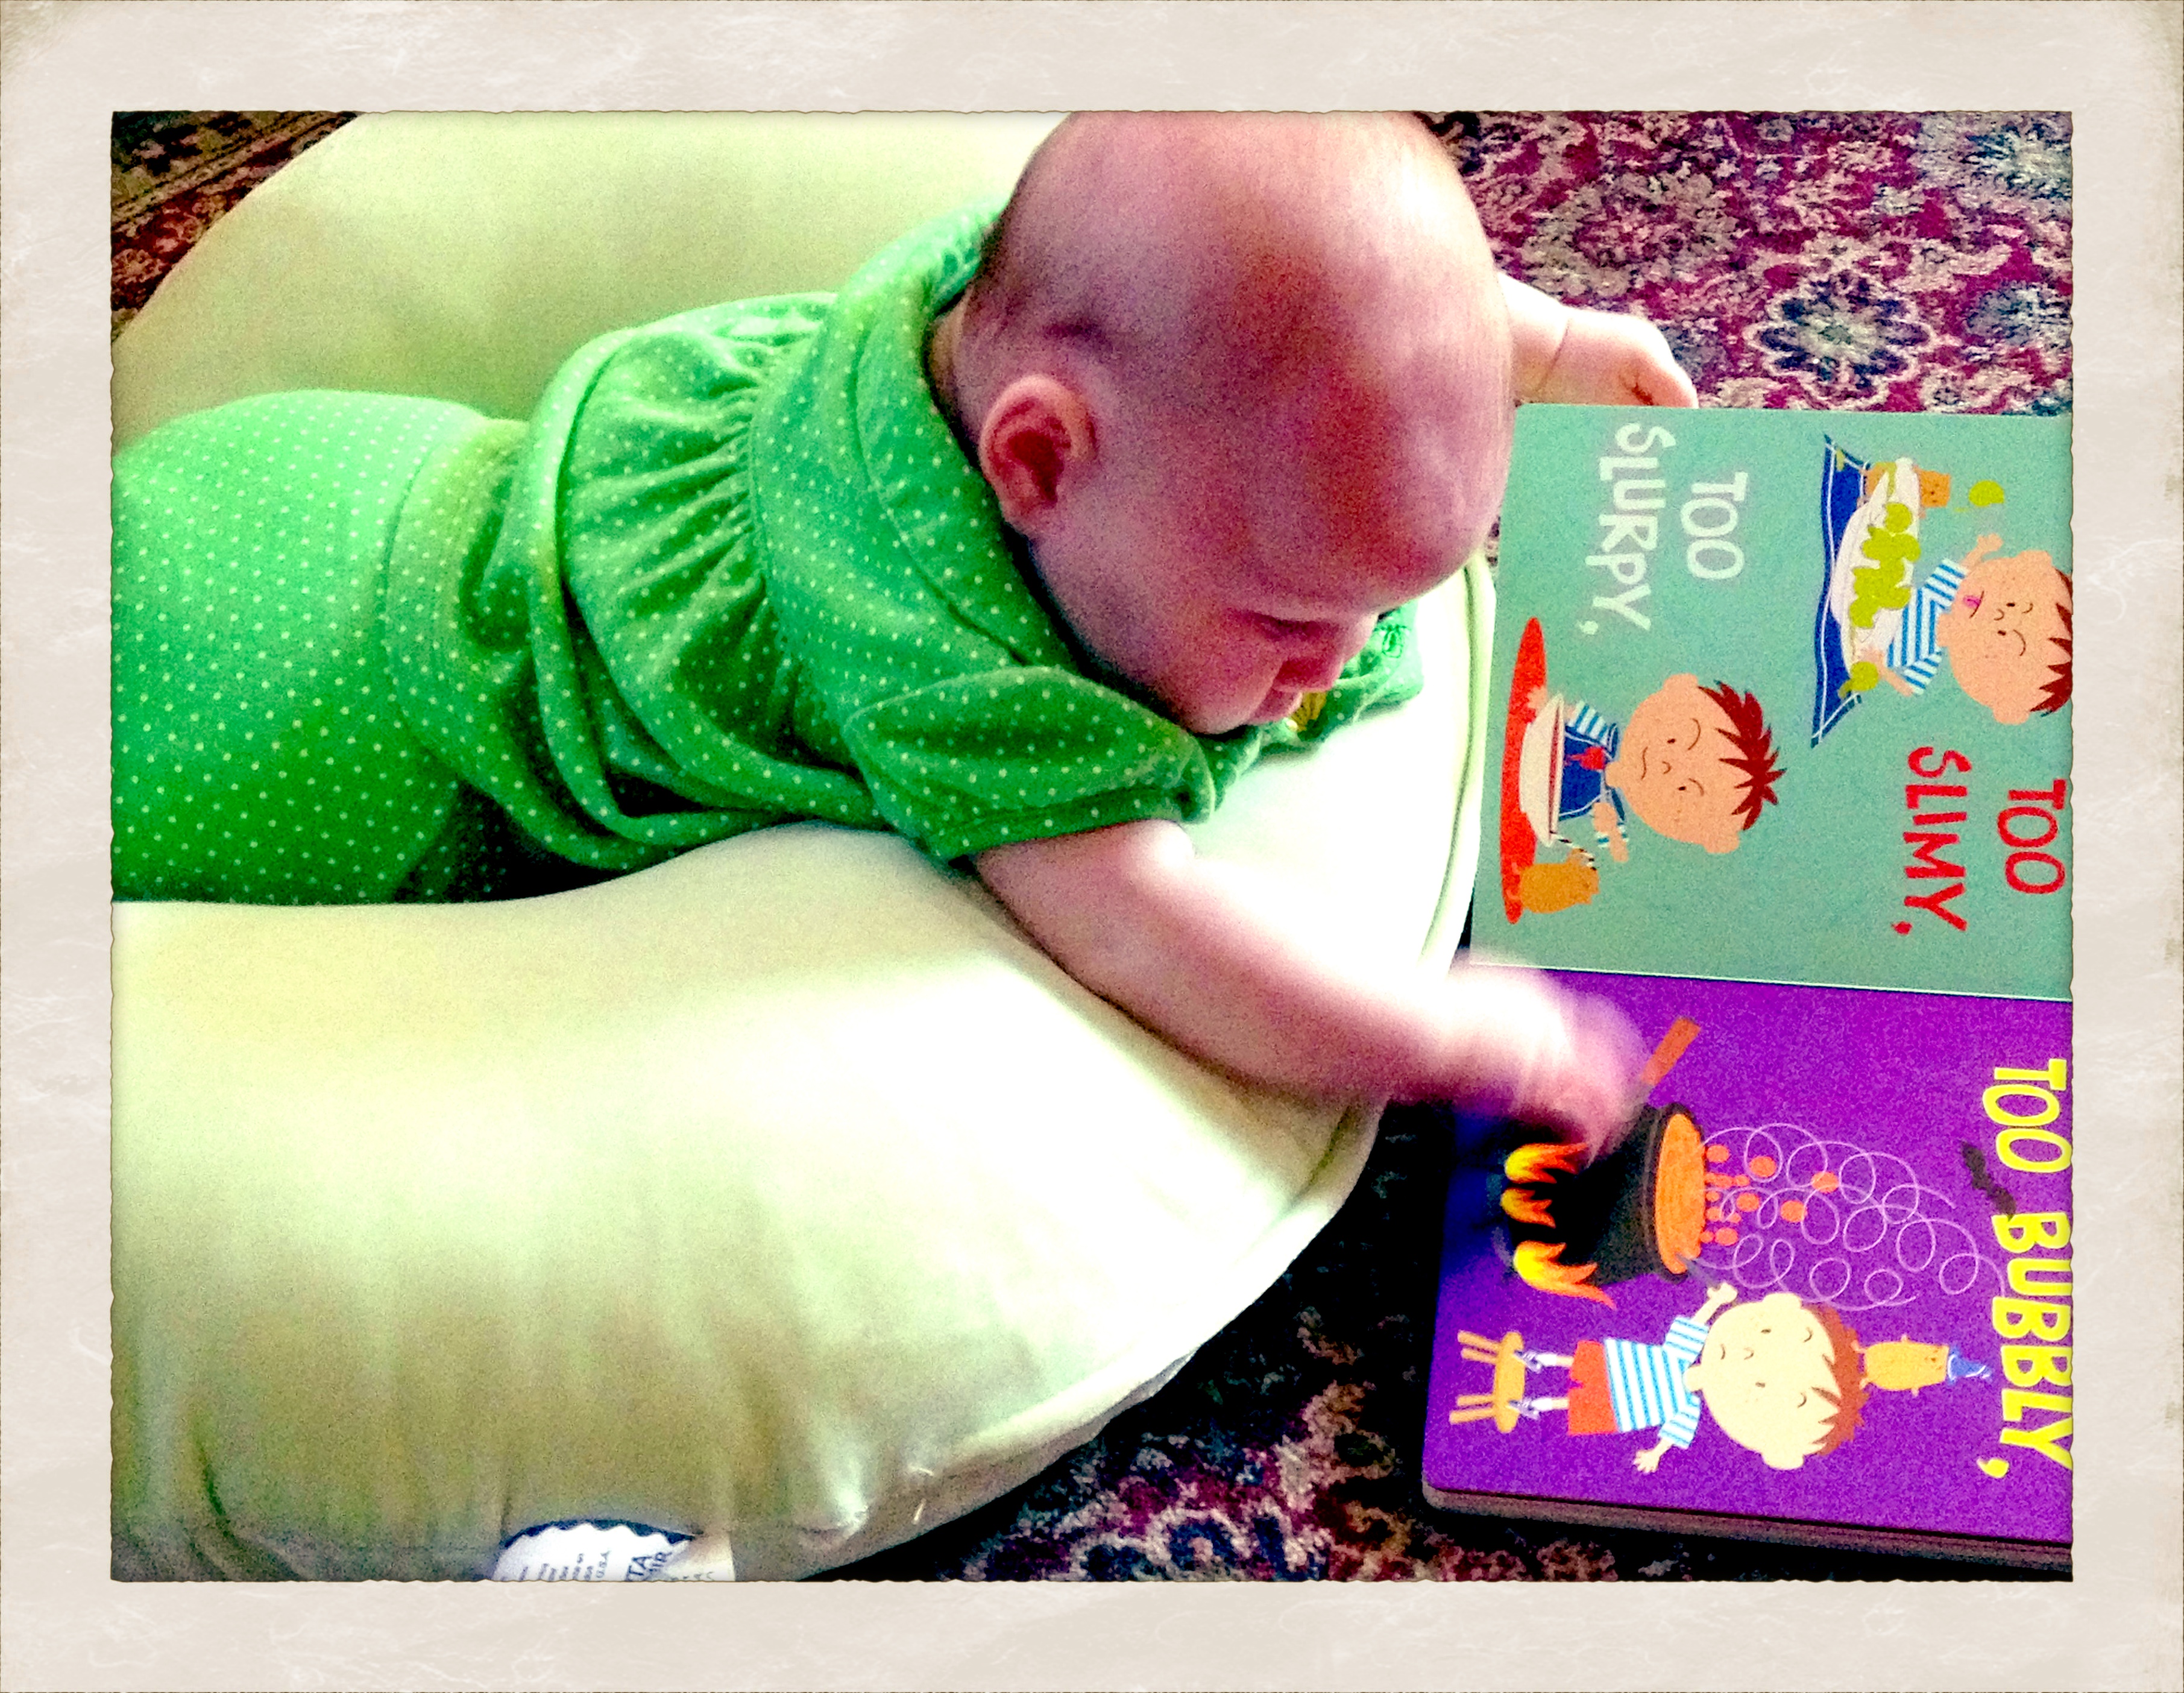 A New Way to do Tummy Time